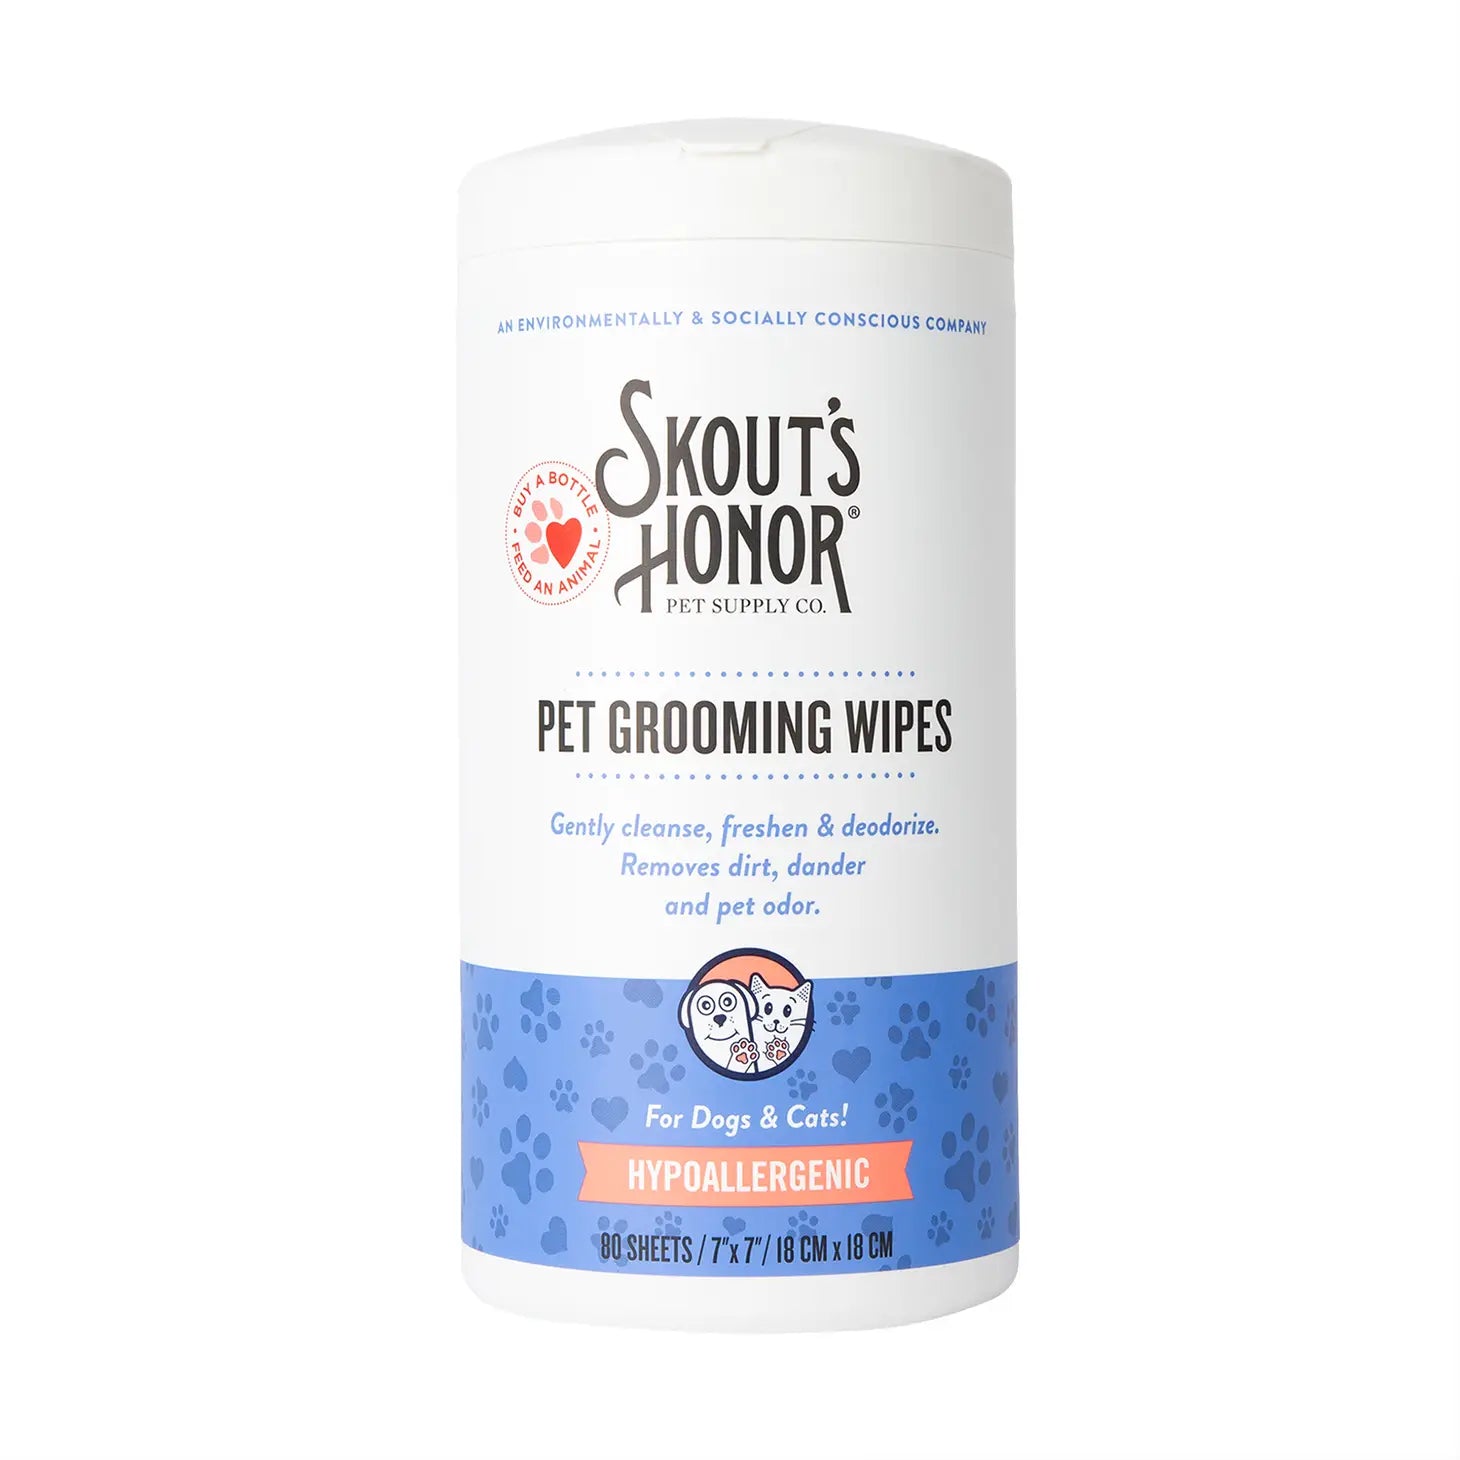 Skout's Honor Pet Grooming Wipes for Dogs & Cats